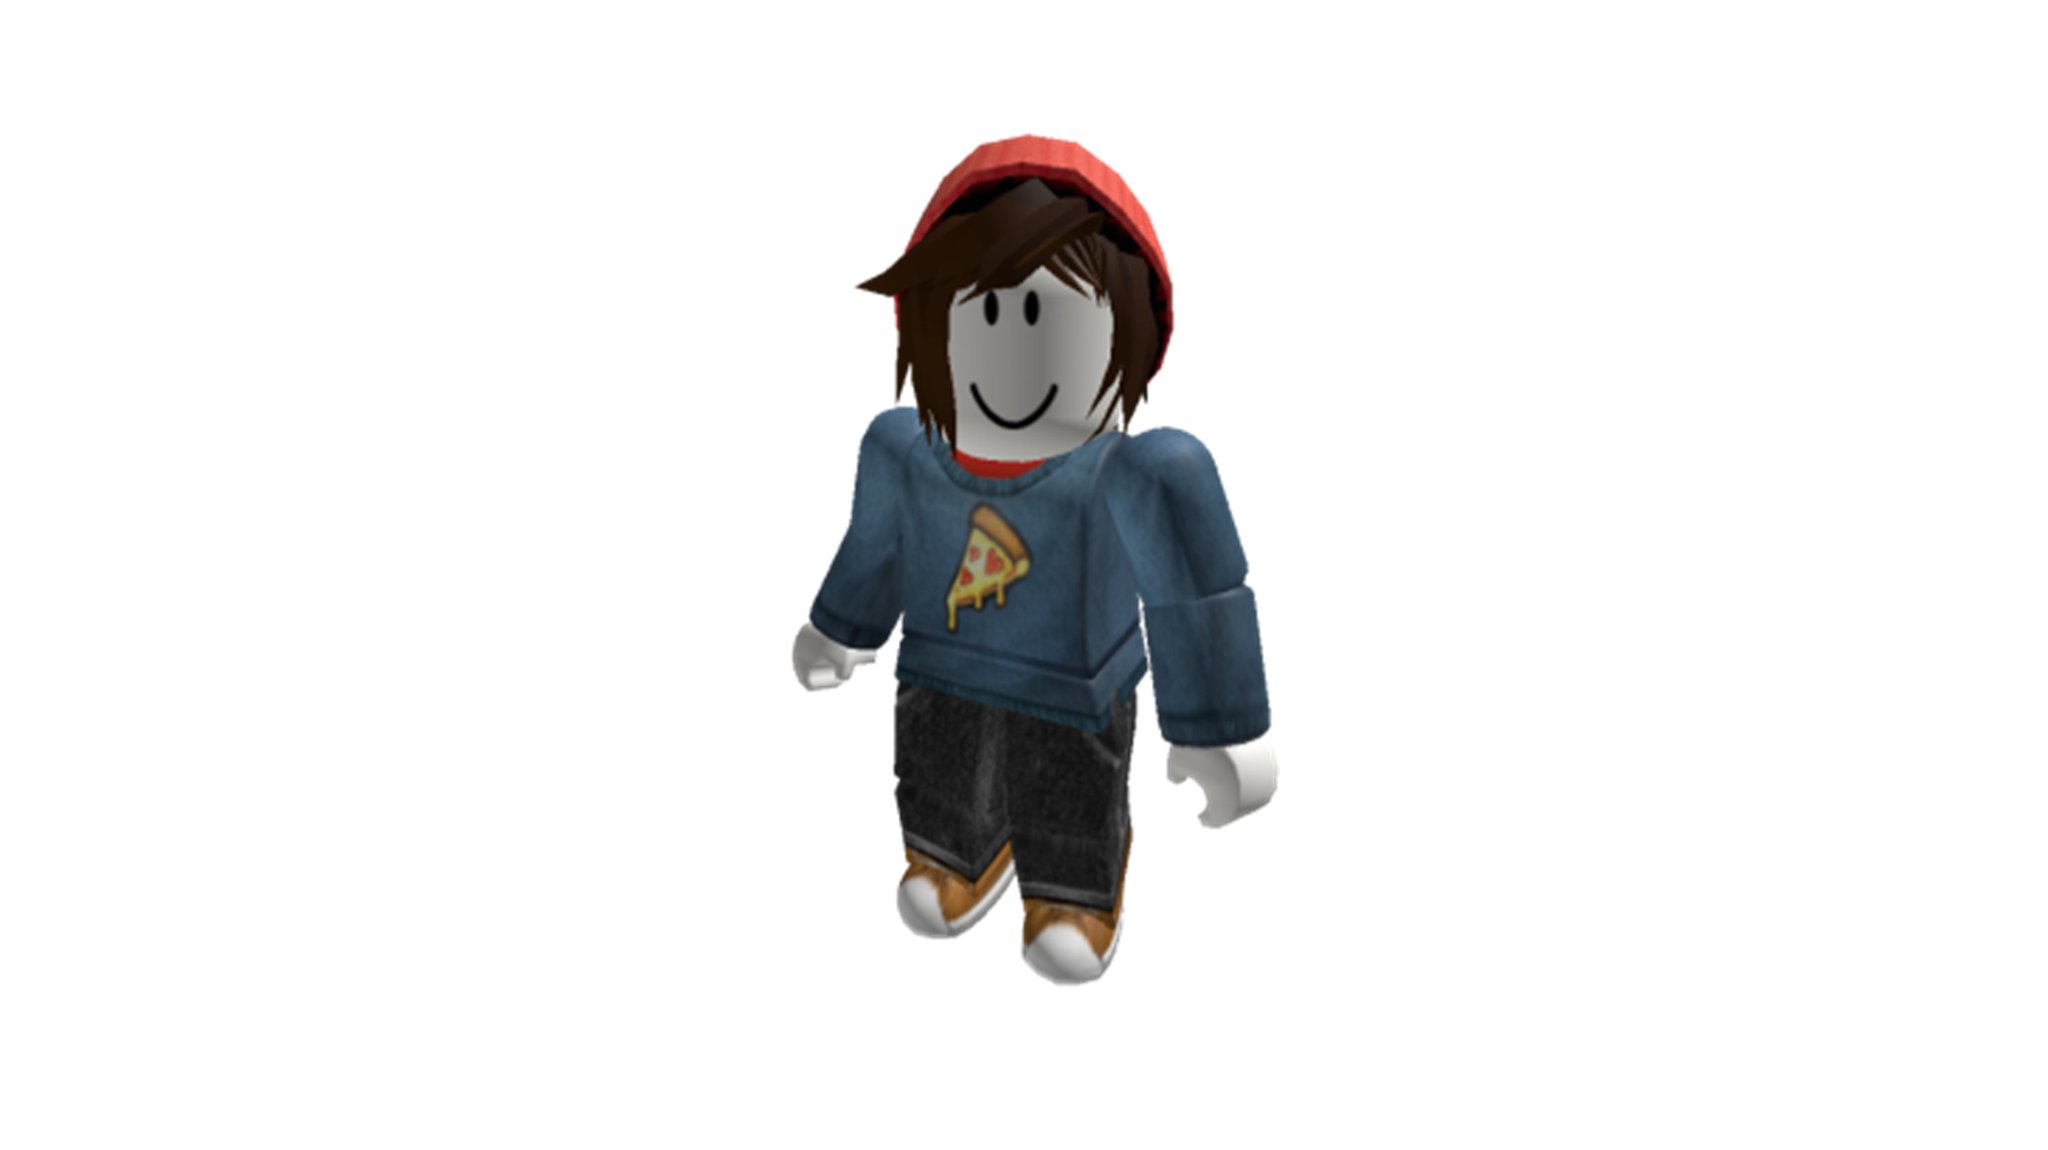 Bloxy News On Twitter When Creating A New Roblox Account You Are No Longer Required To Select A Gender The Default Avatar Has Also Been Changed To Accommodate Not Having To Pick - bloxy news on twitter here s the first look at layered clothing and the future of roblox avatars to come rdc2020